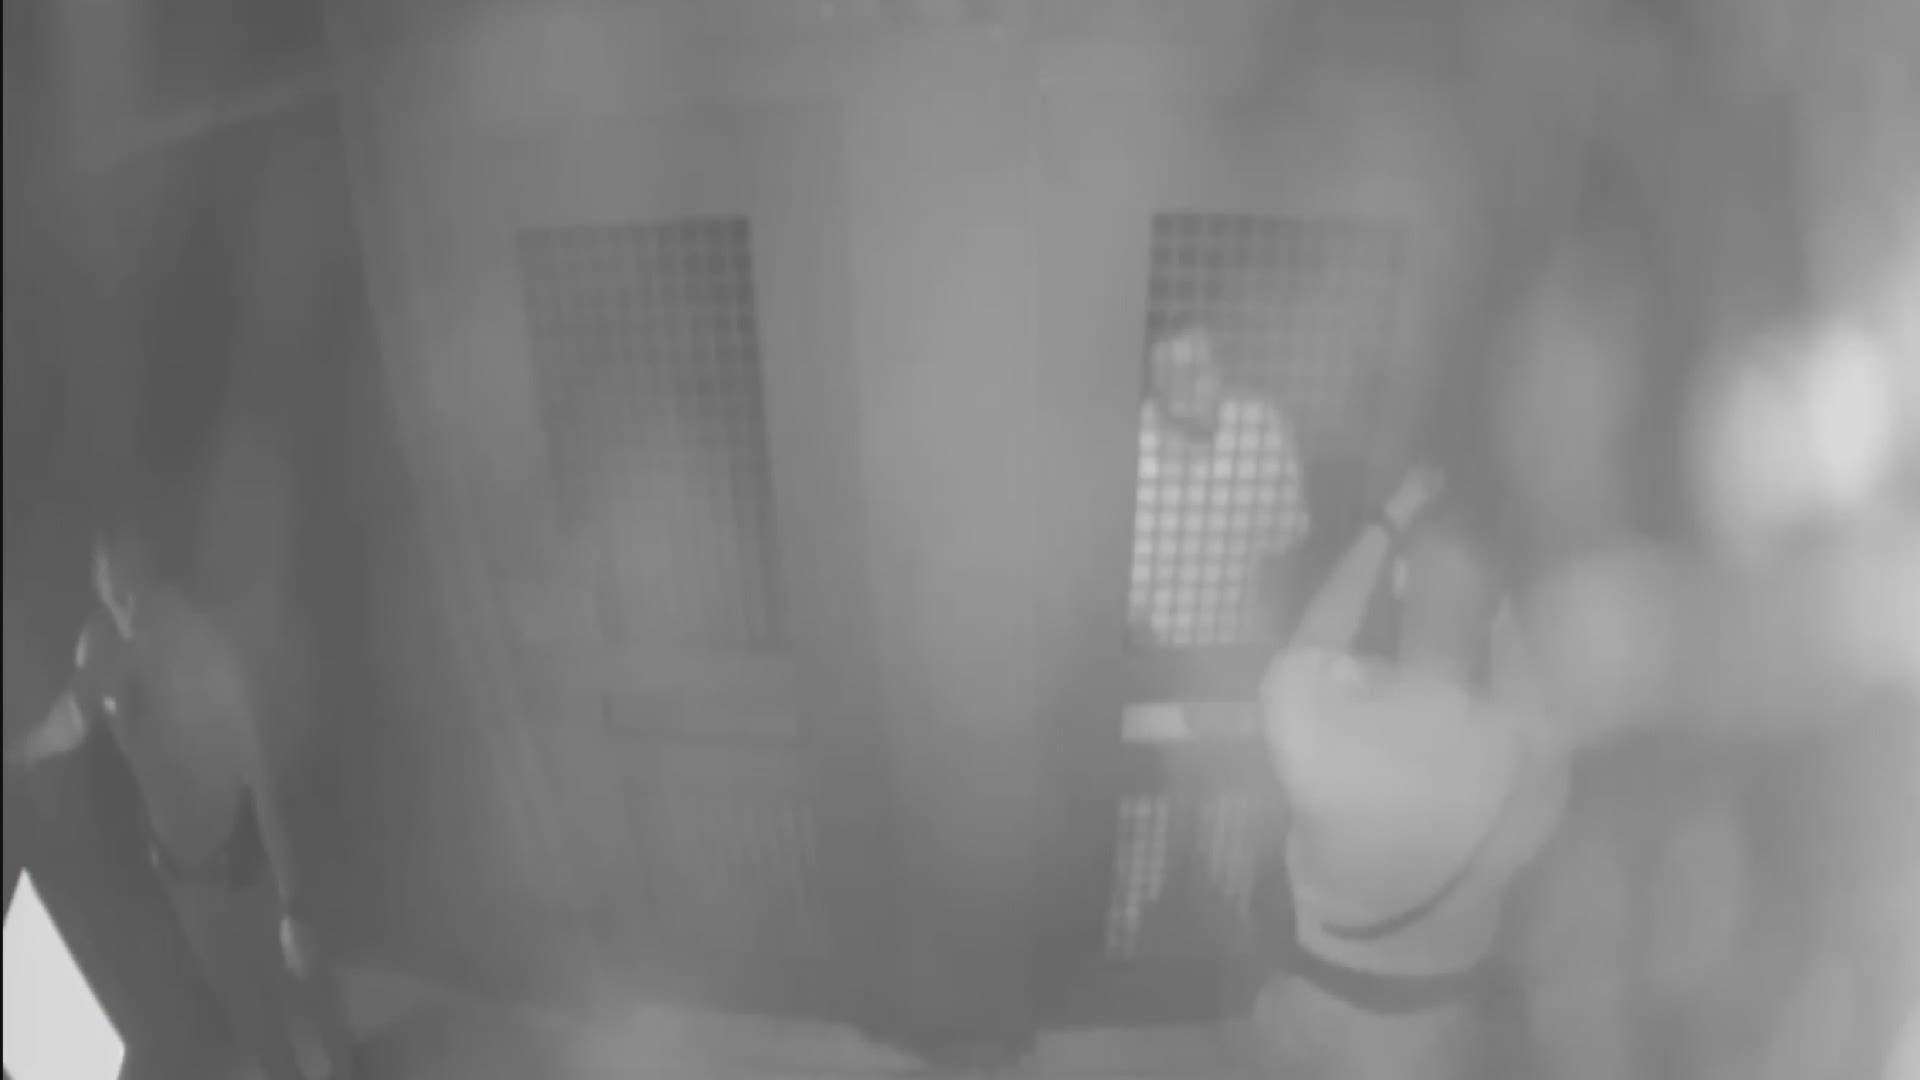 The Manatee County Sheriff's deputy resigned after video reportedly shows him punching an inmate. The sheriff's office said Deputy Louis Valentin resigned before an internal investigation could be completed.